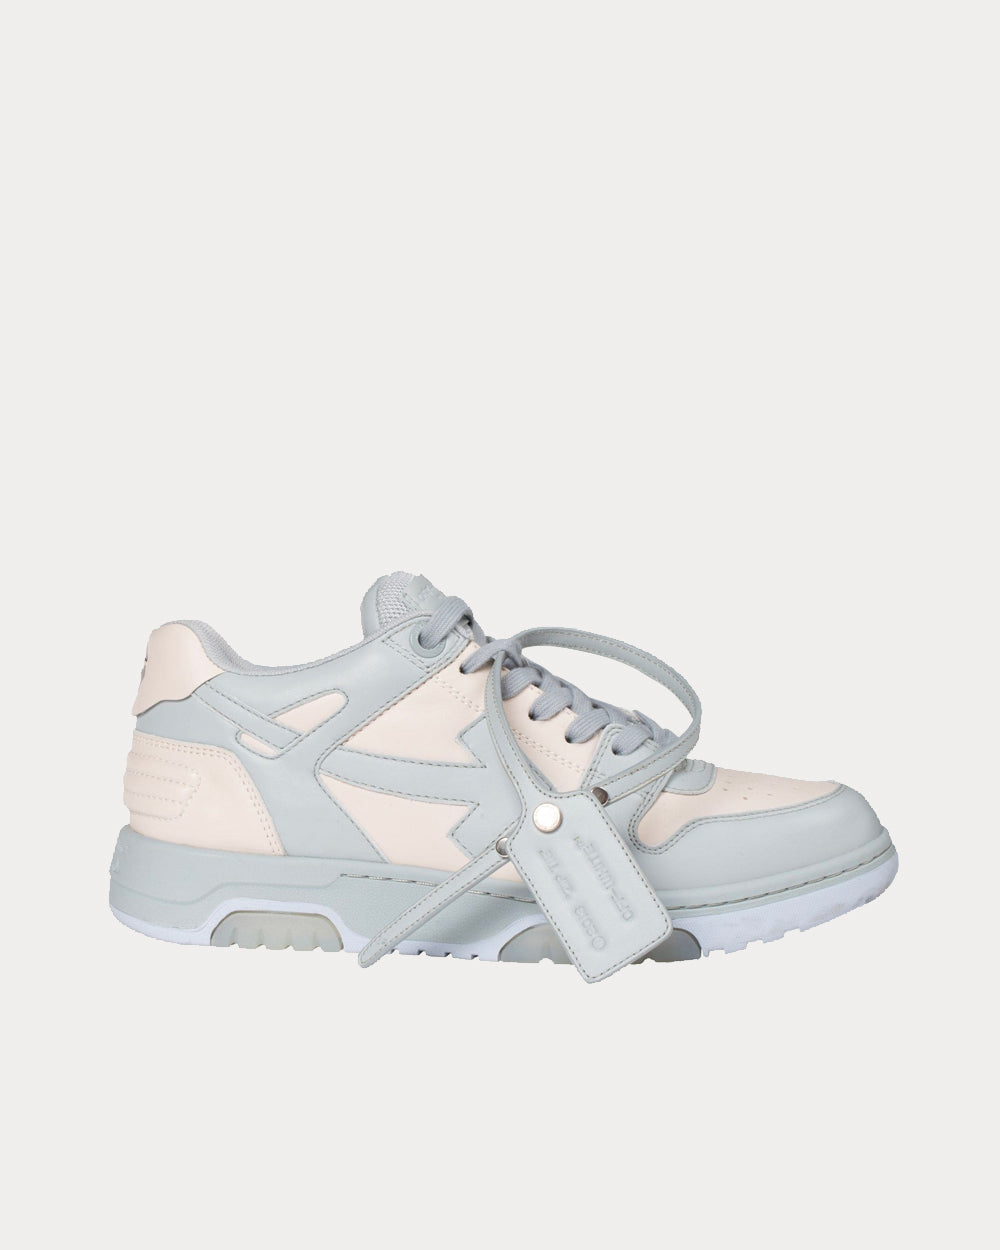 Off-White Out Of Office 'OOO' Triple White - SoleSnk